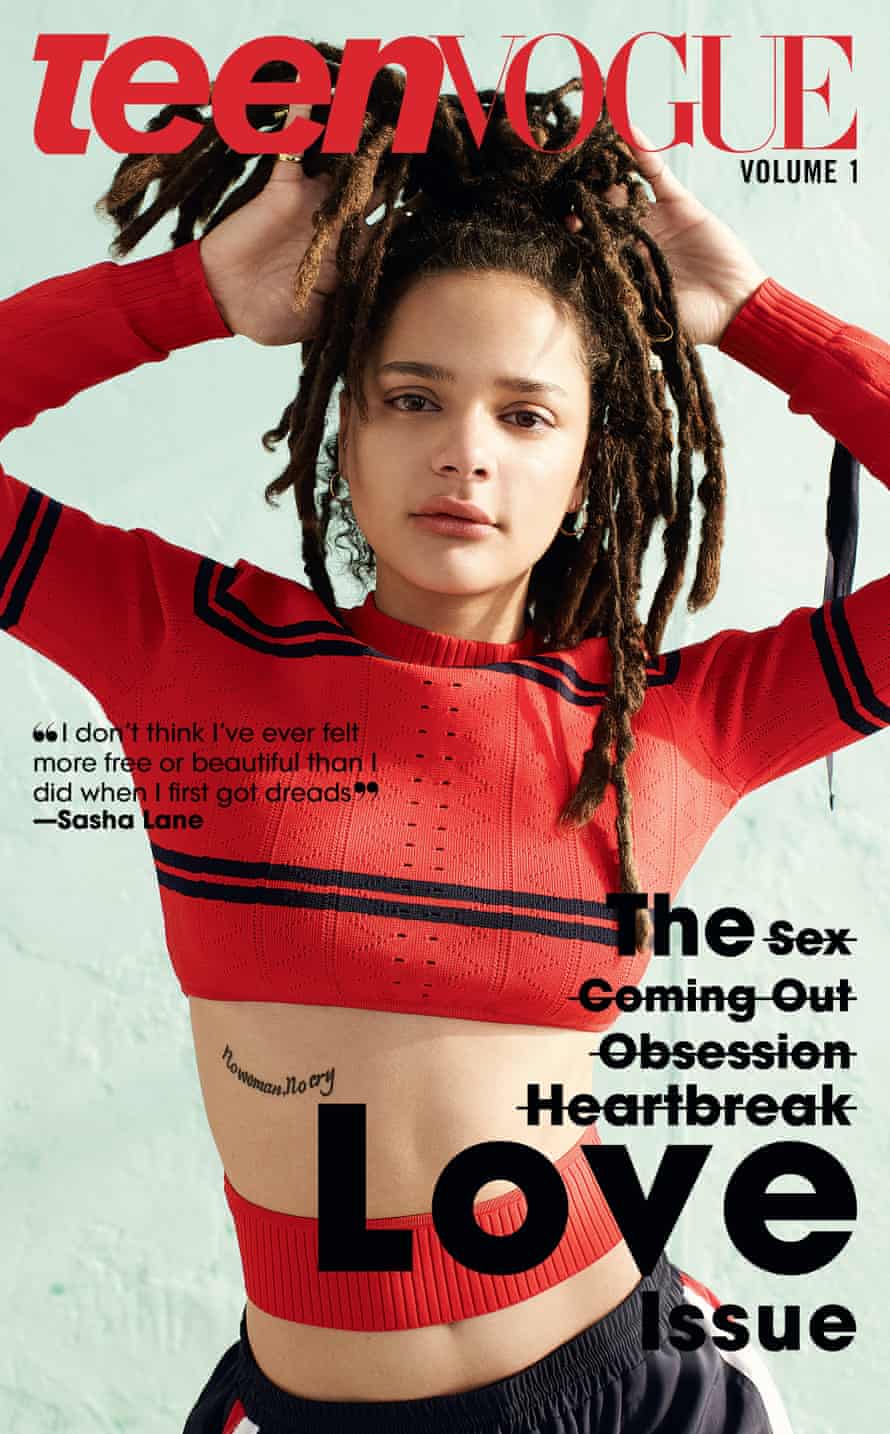 The new issue features actor Sasha Lane.